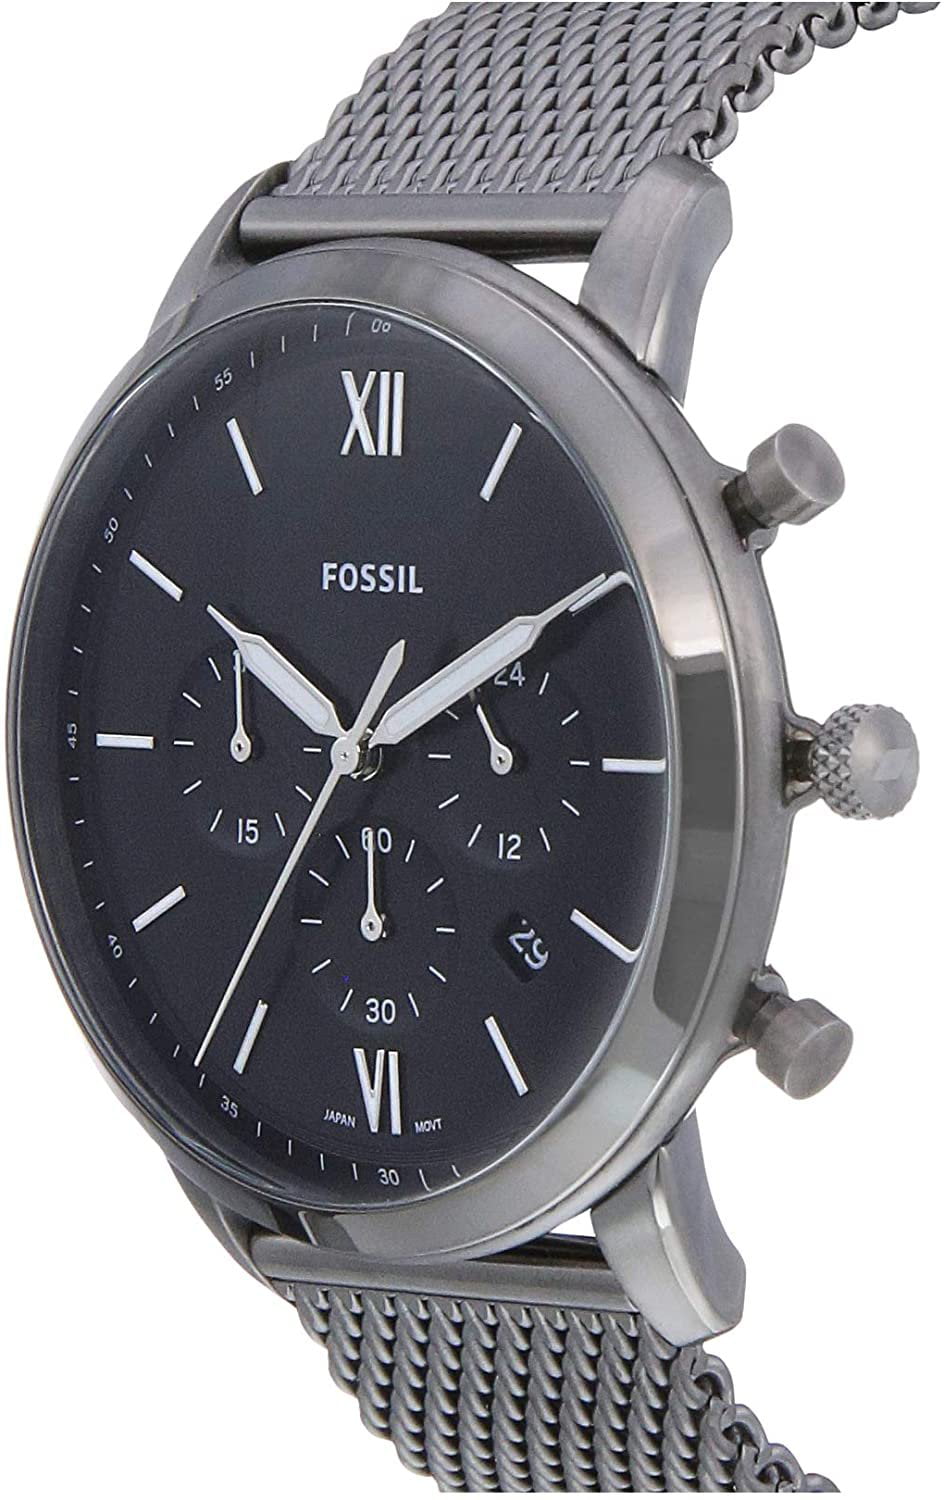 Fossil Men's Neutra Chronograph, Stainless Steel Watch, FS5380